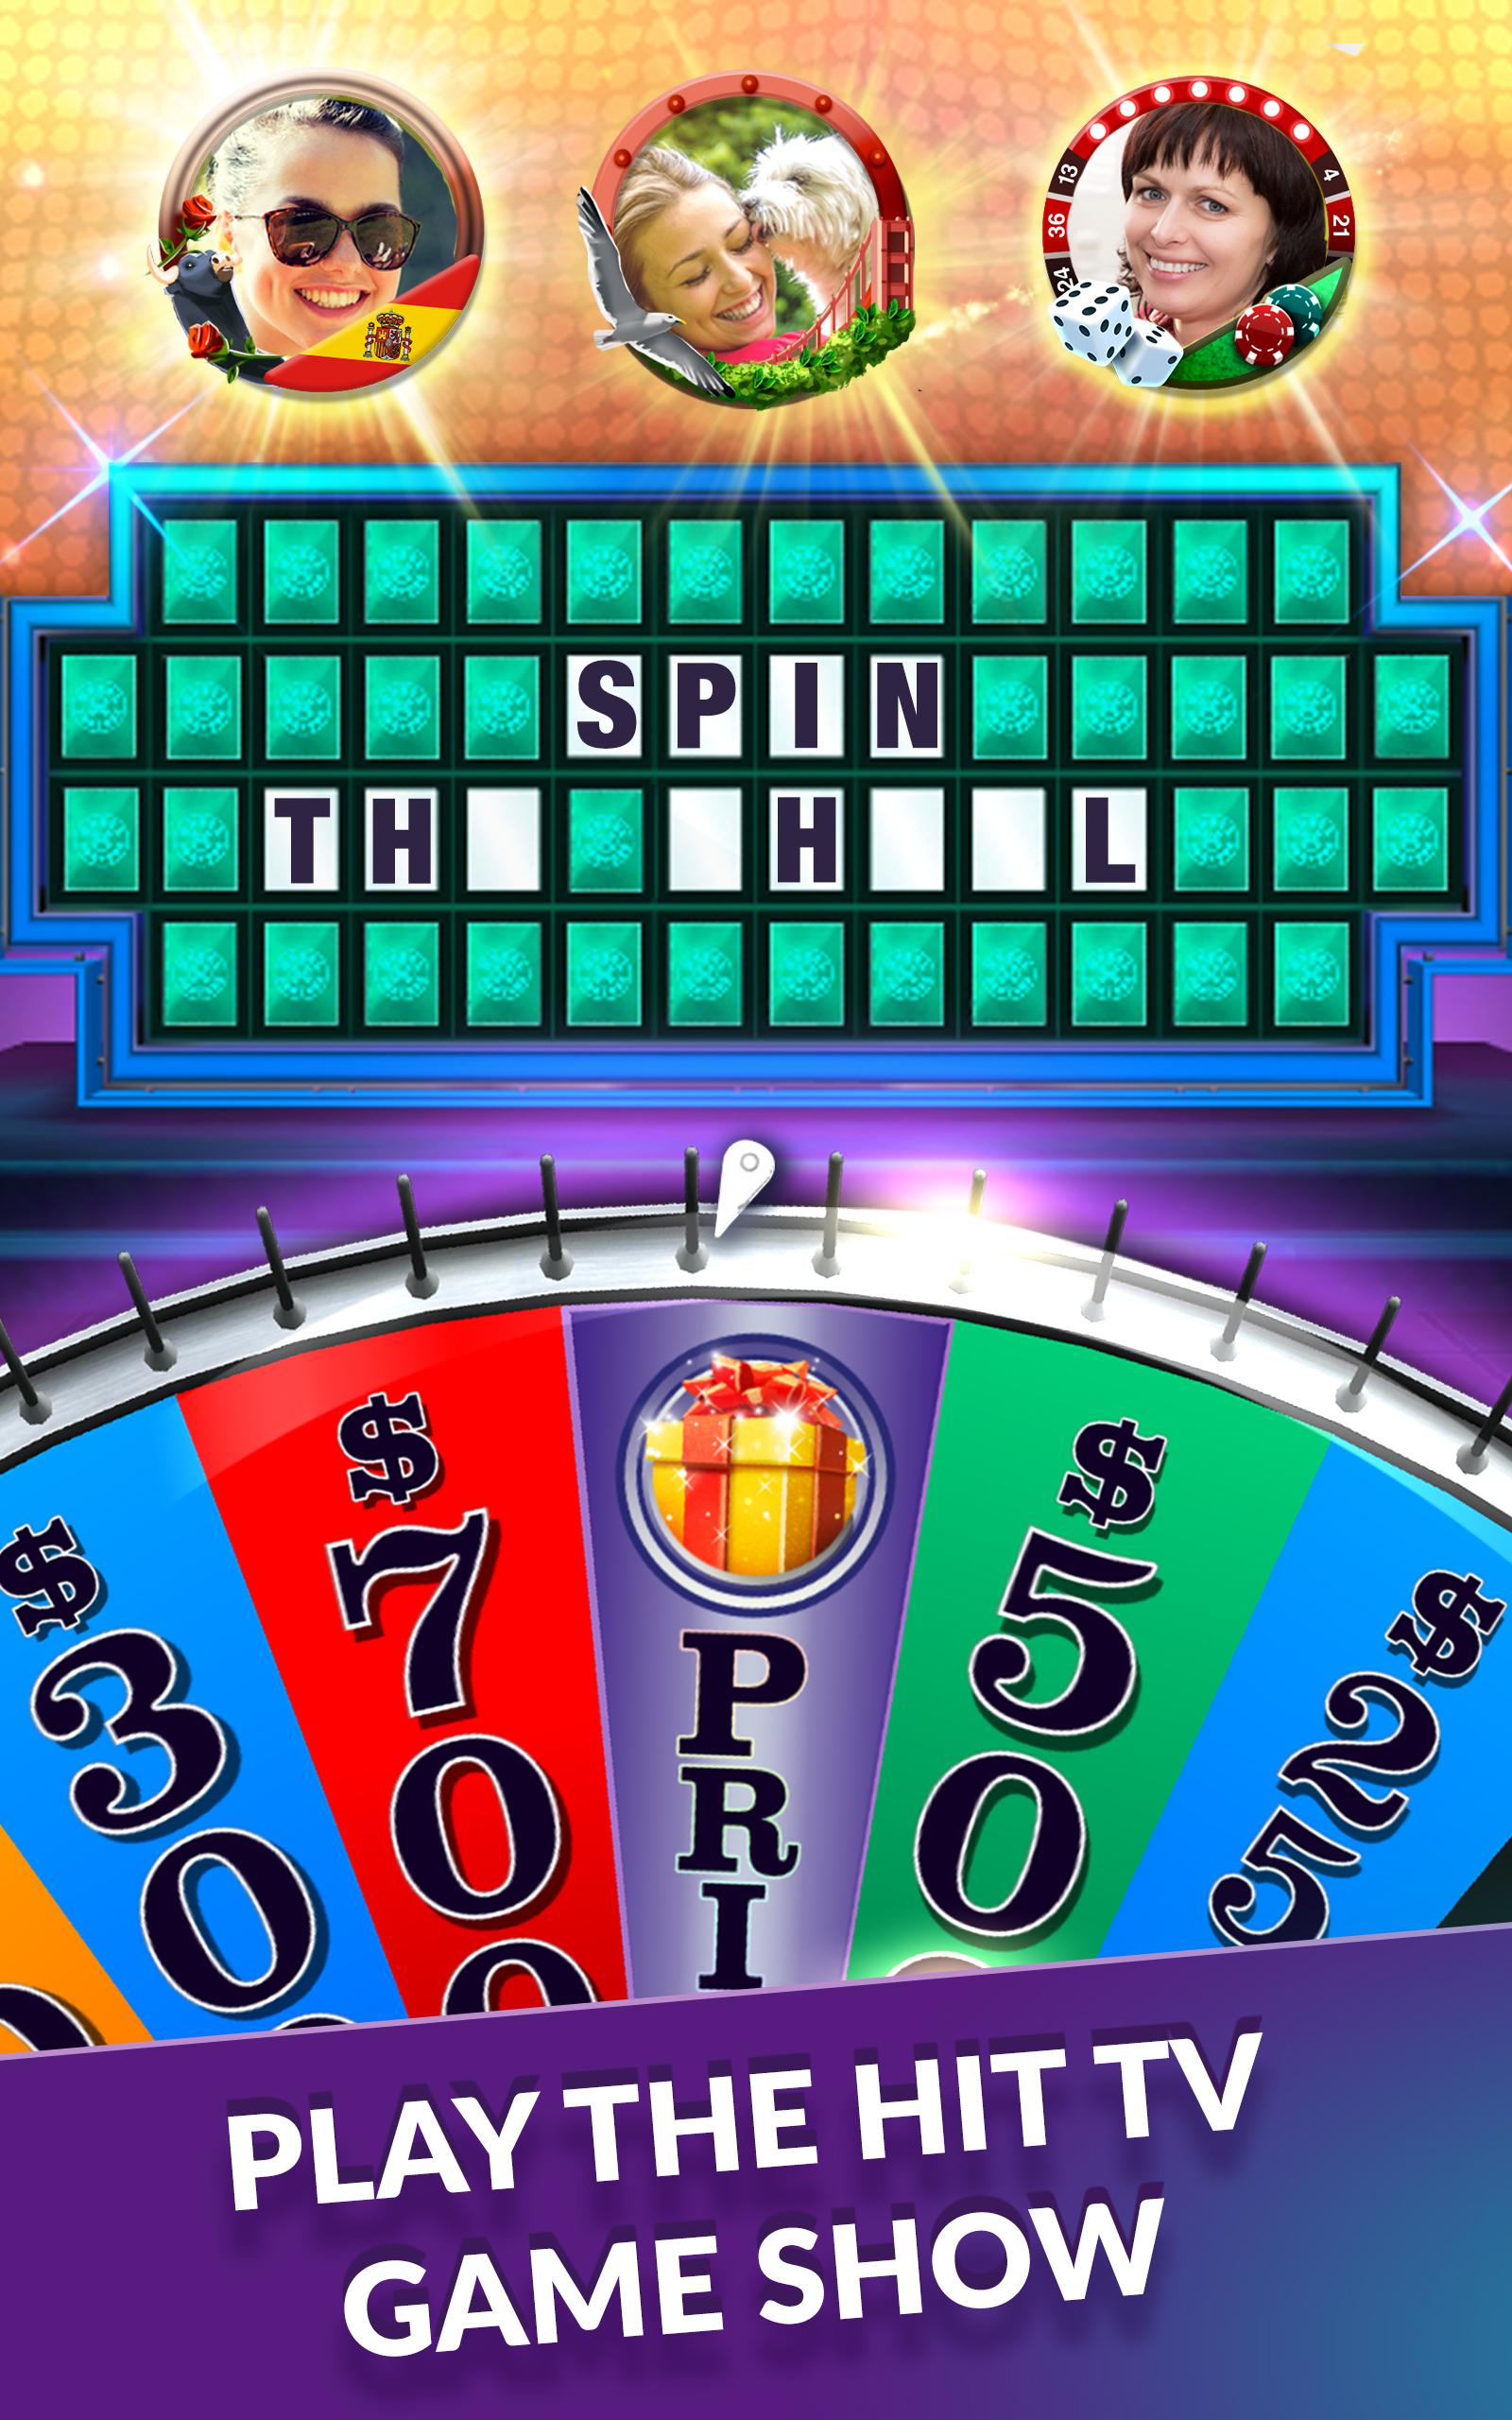 The original wheel of fortune game show